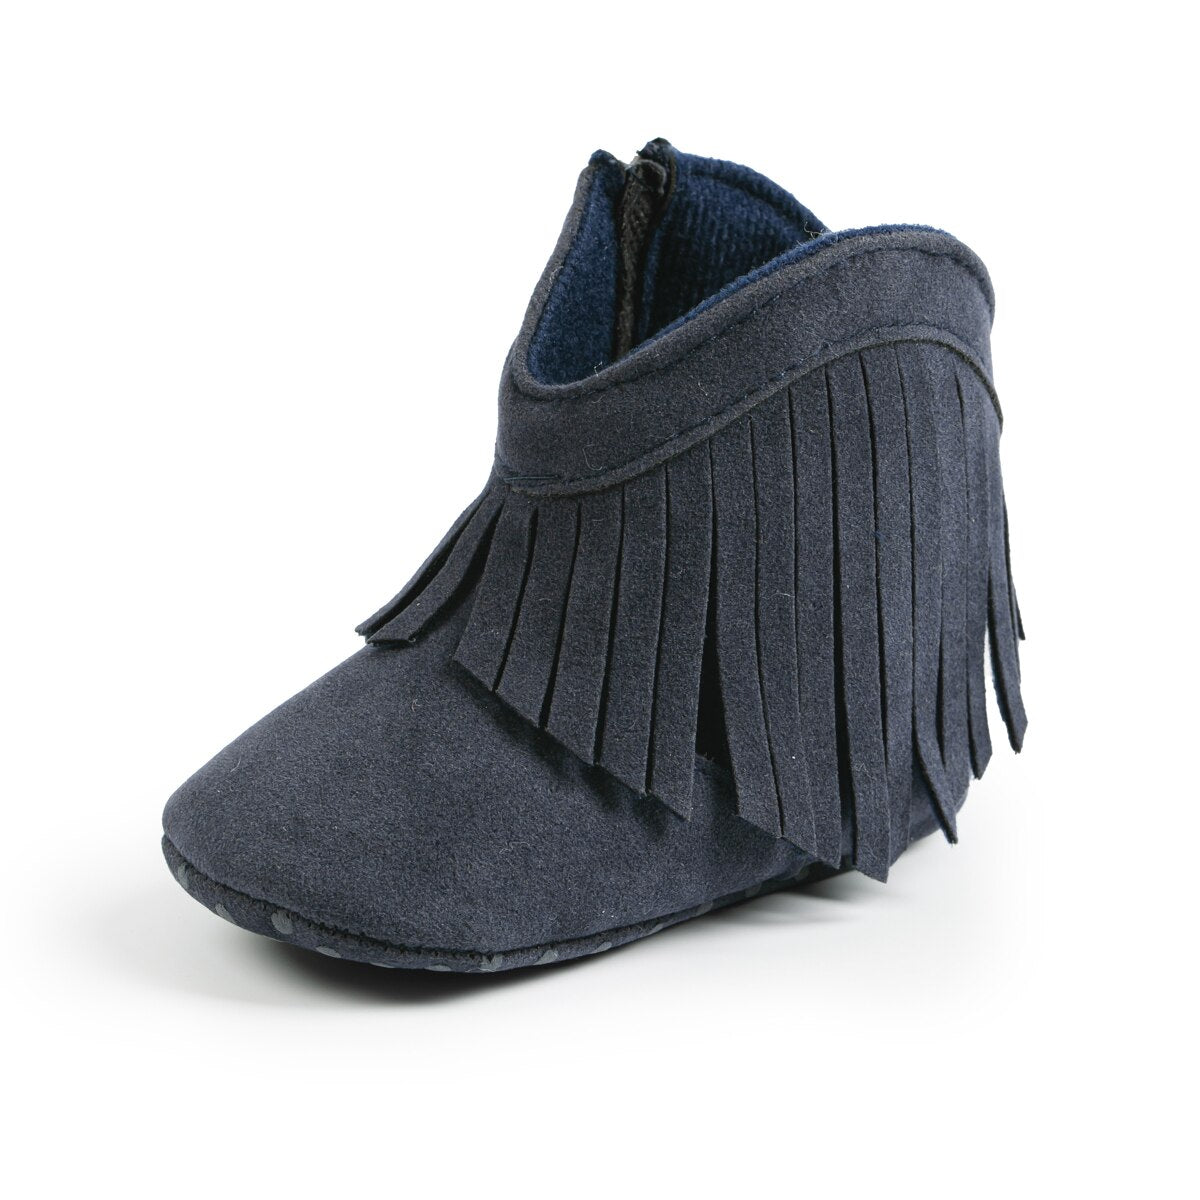 Baby/Toddler Soft Sole Anti-slip Moccasin/Booties